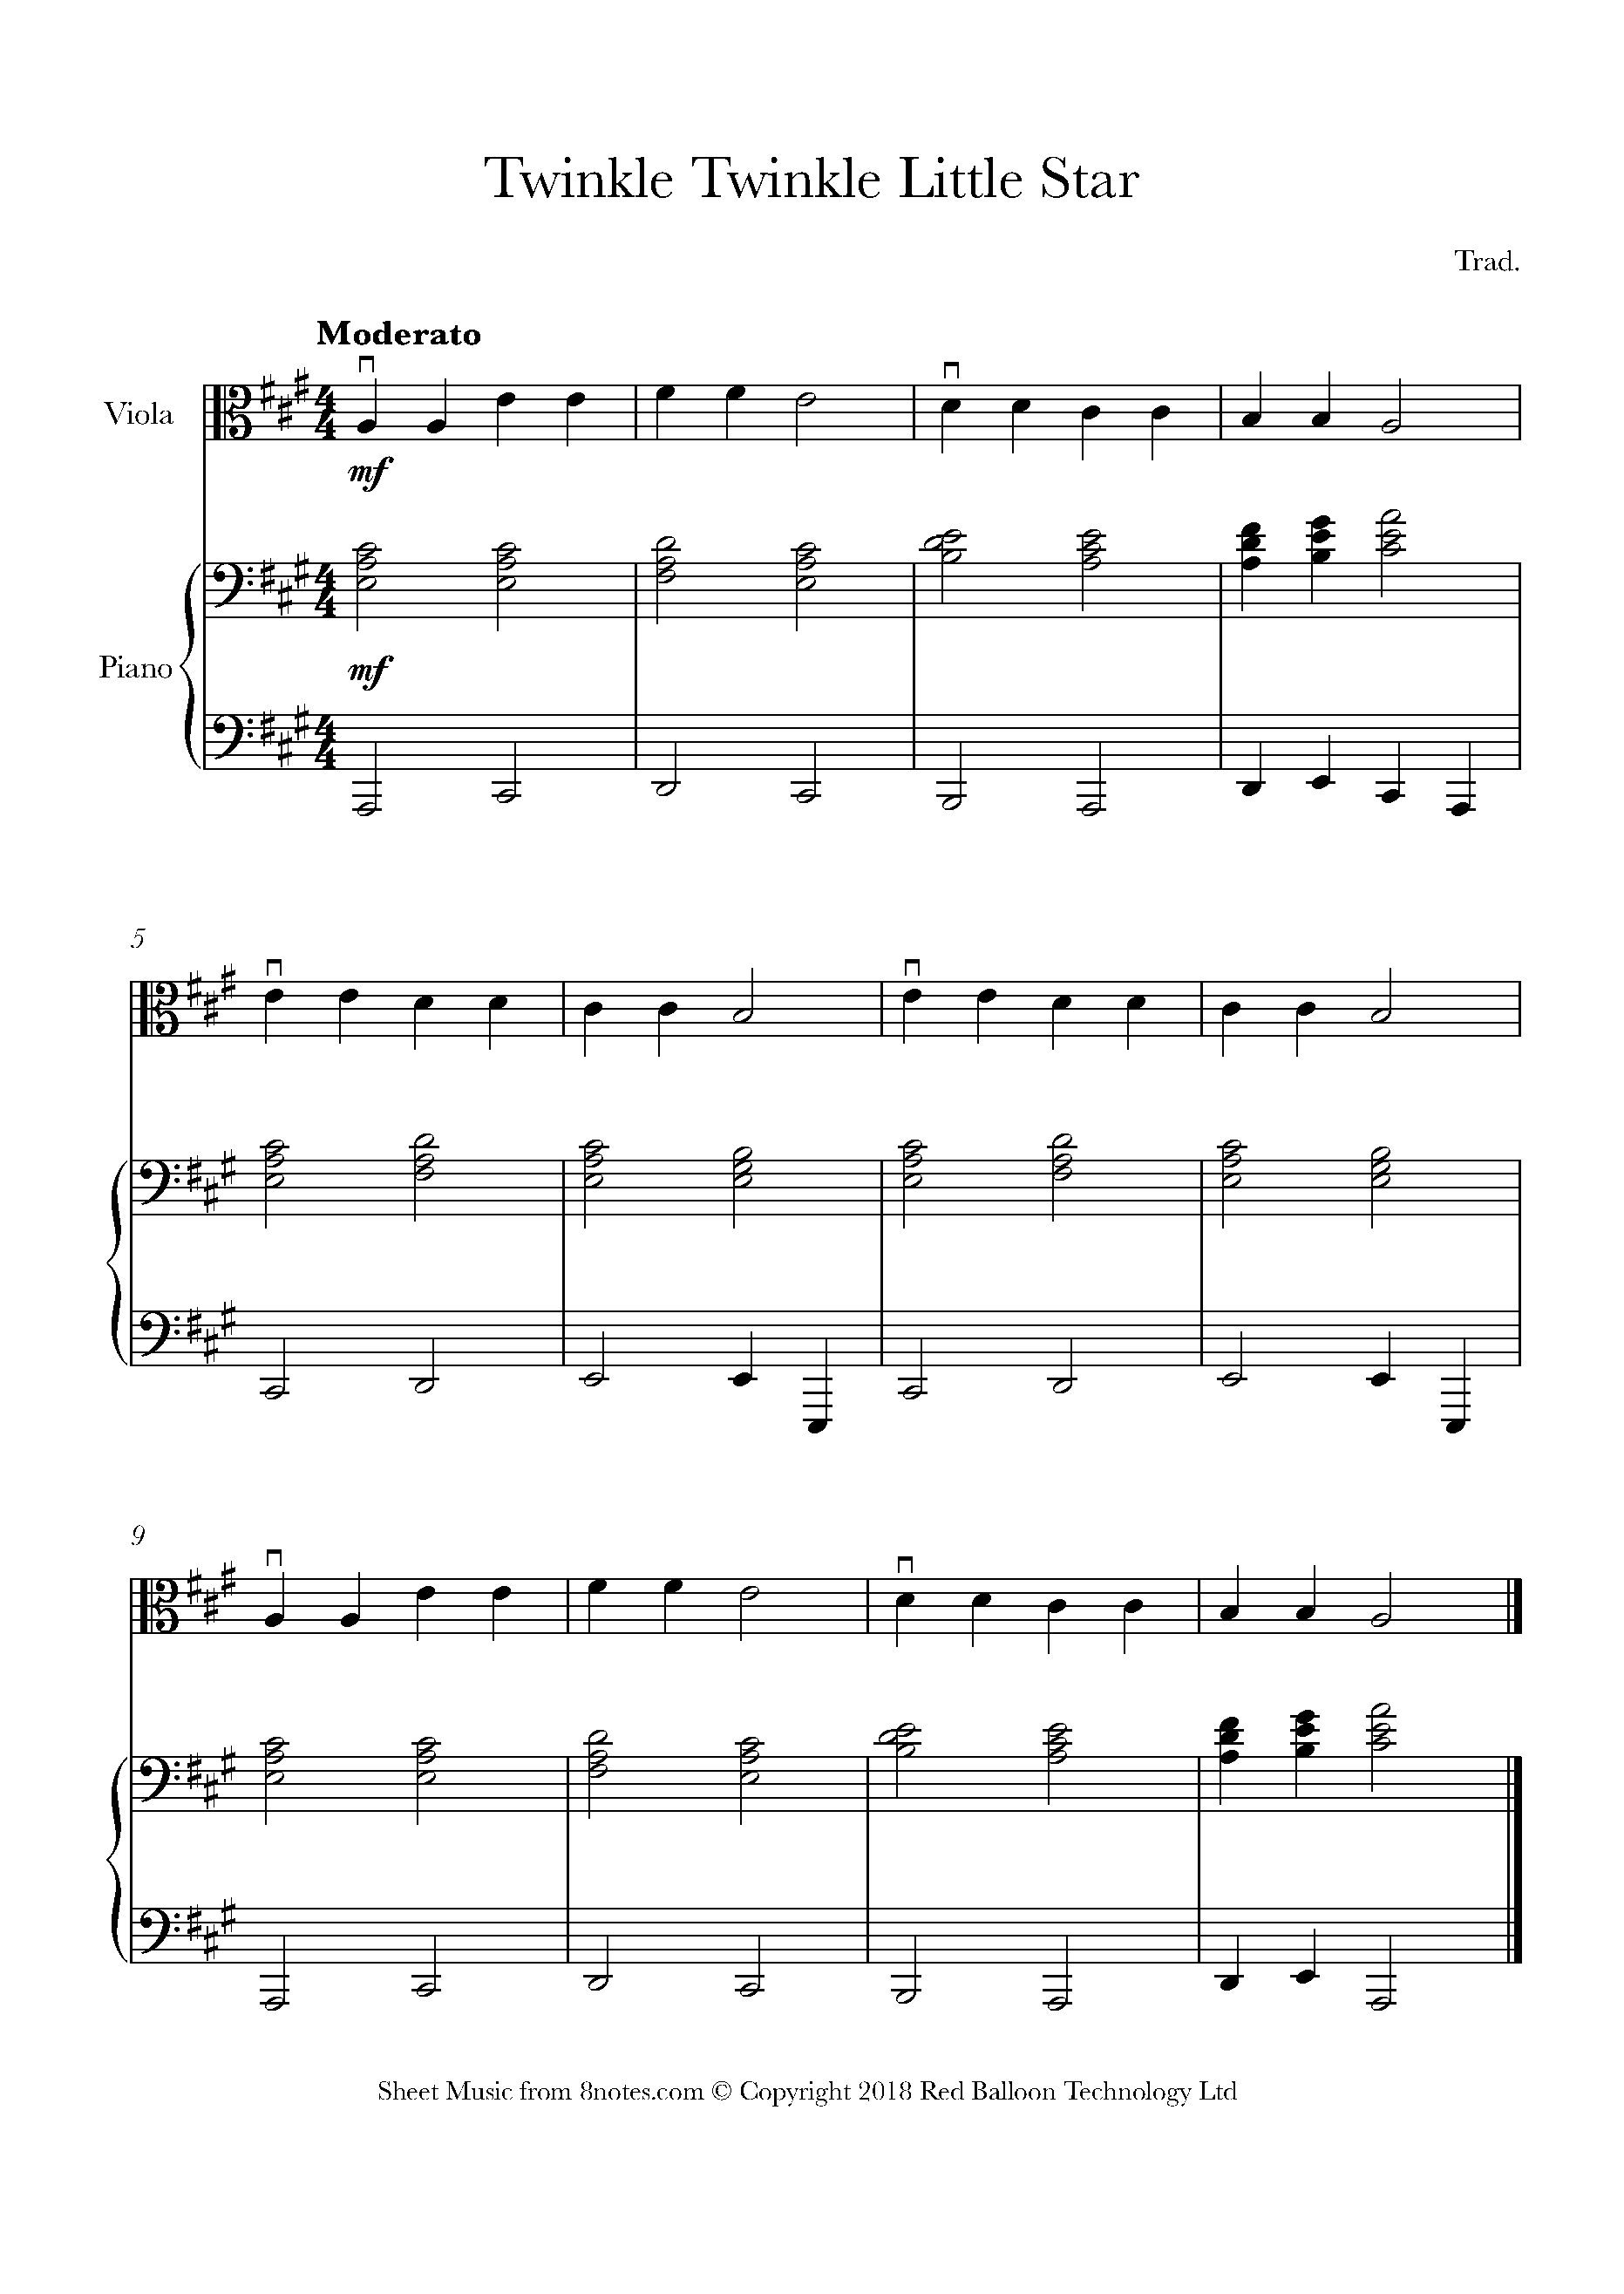 Twinkle, Twinkle, Little Star for guitar - chords, tablature and notes